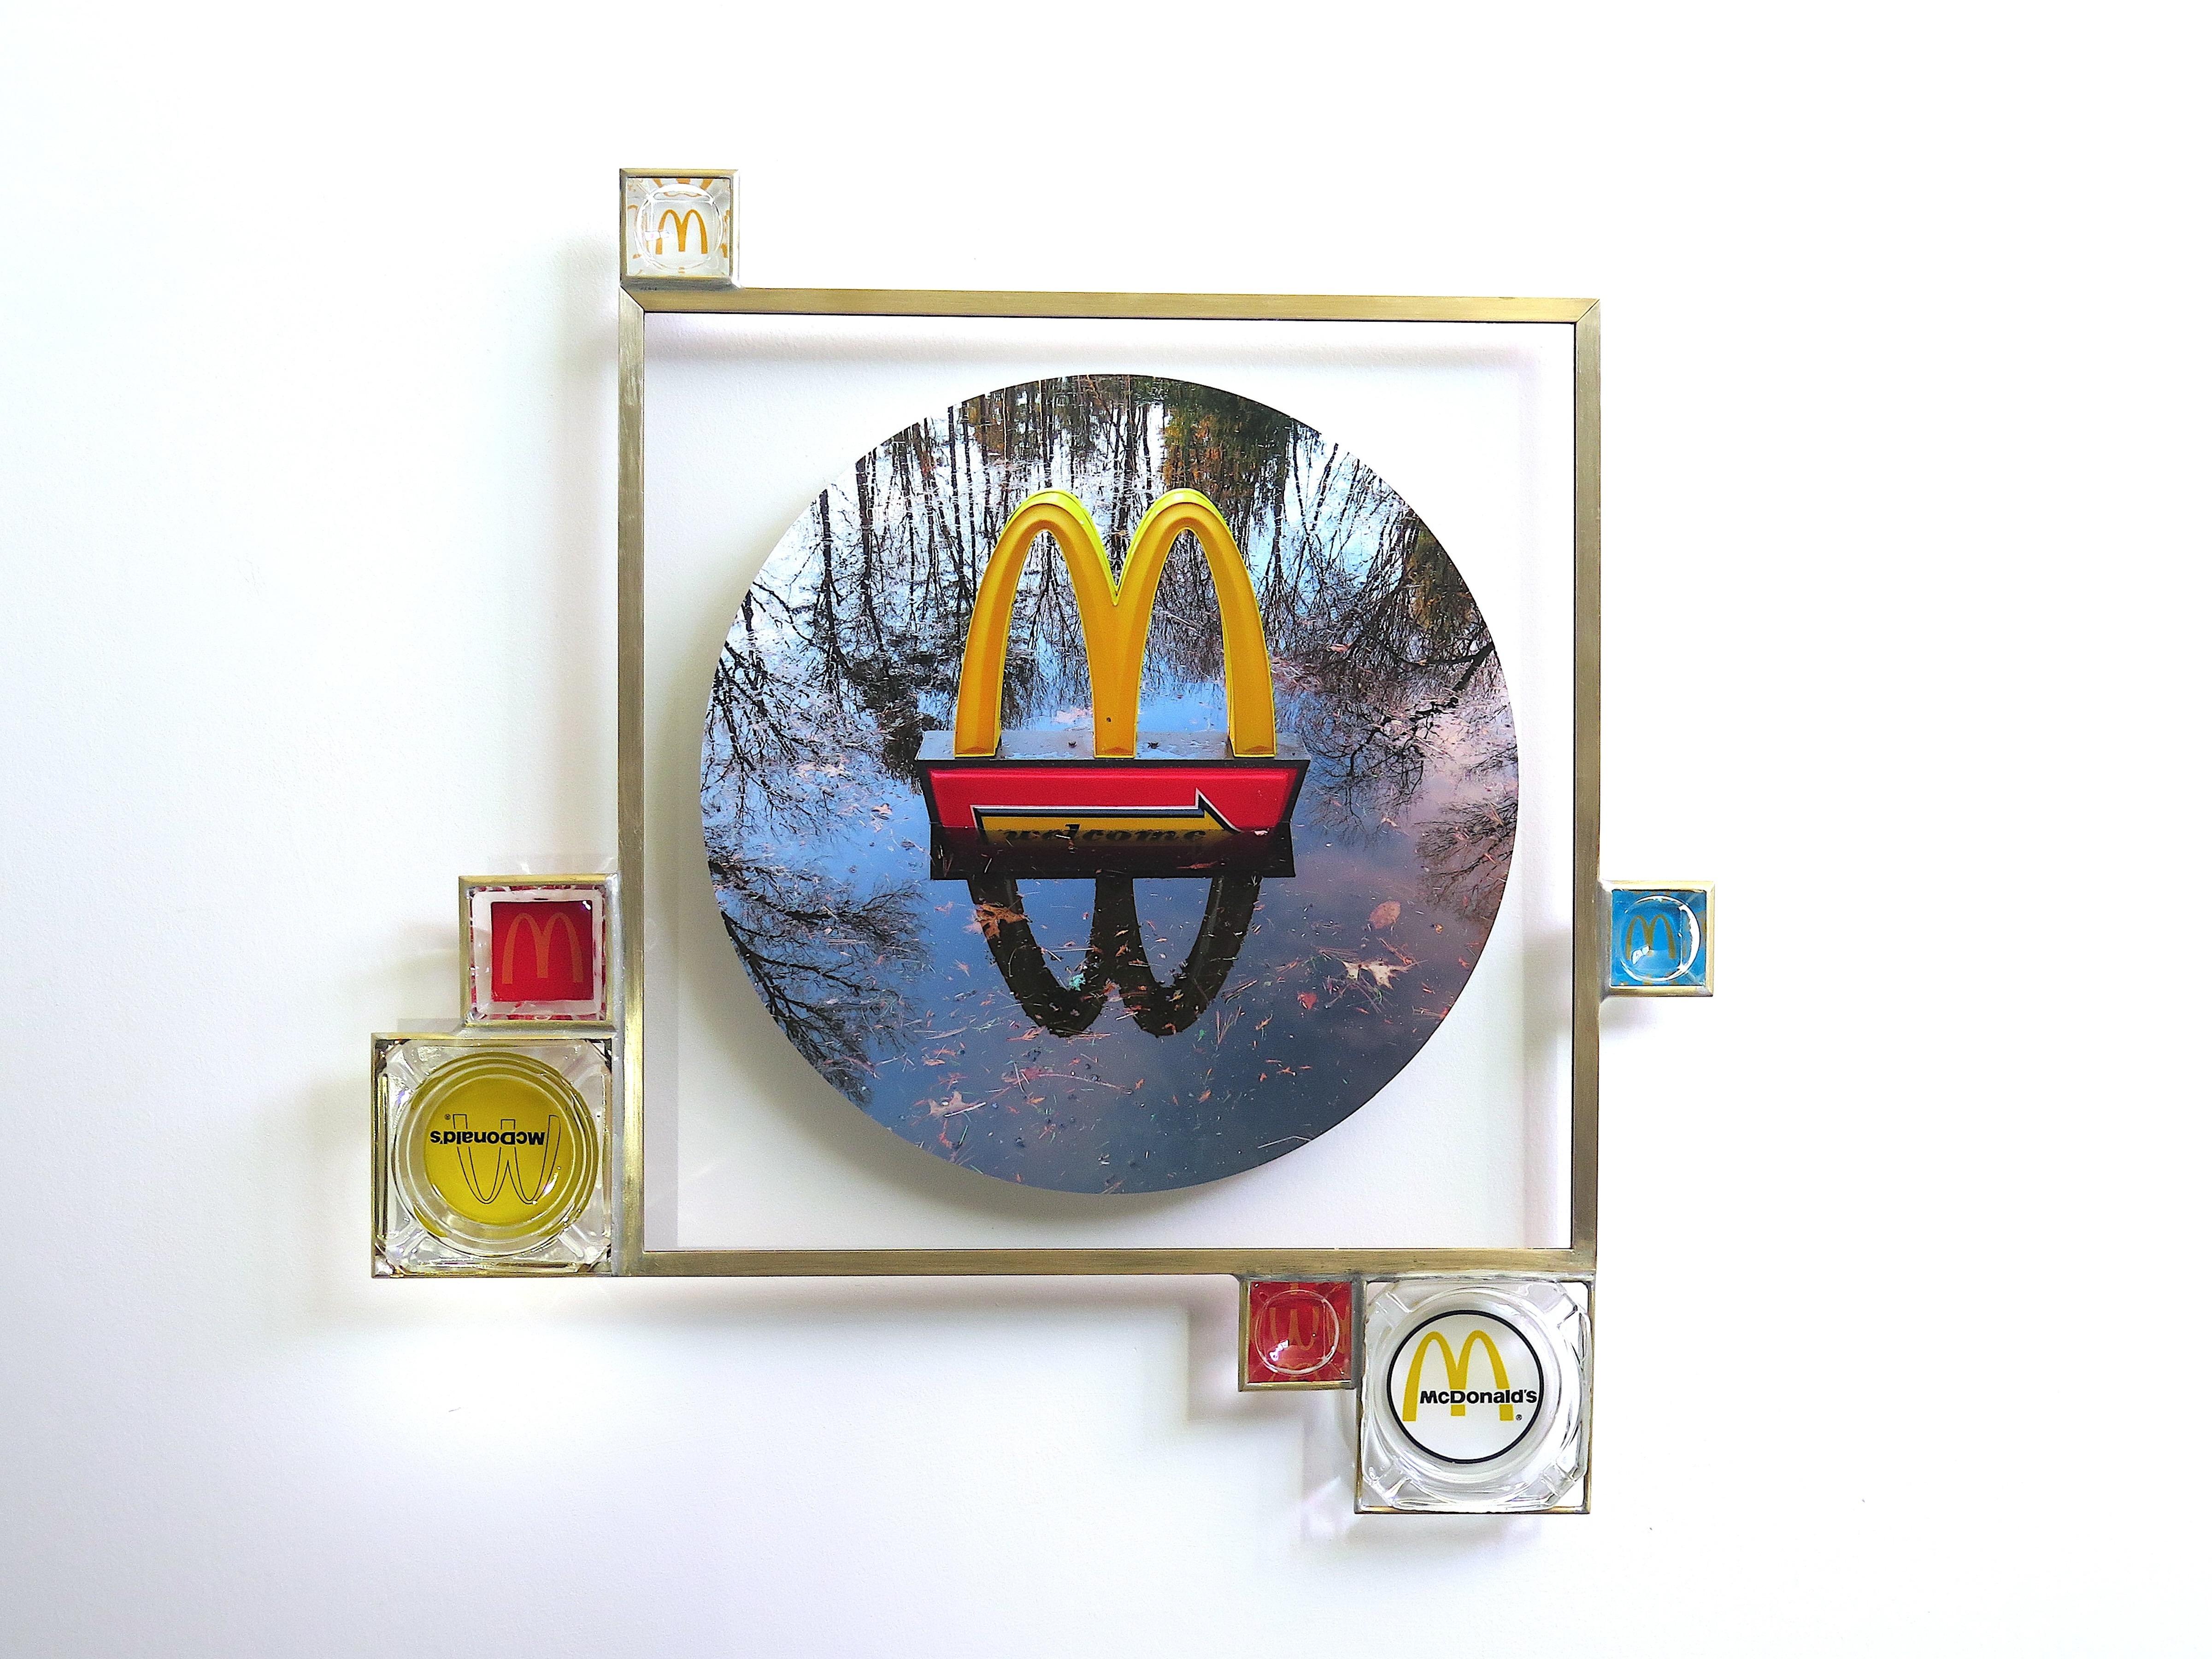 Richard Klein, McDonalds (El Nino), 2024, Found and altered objects assemblage